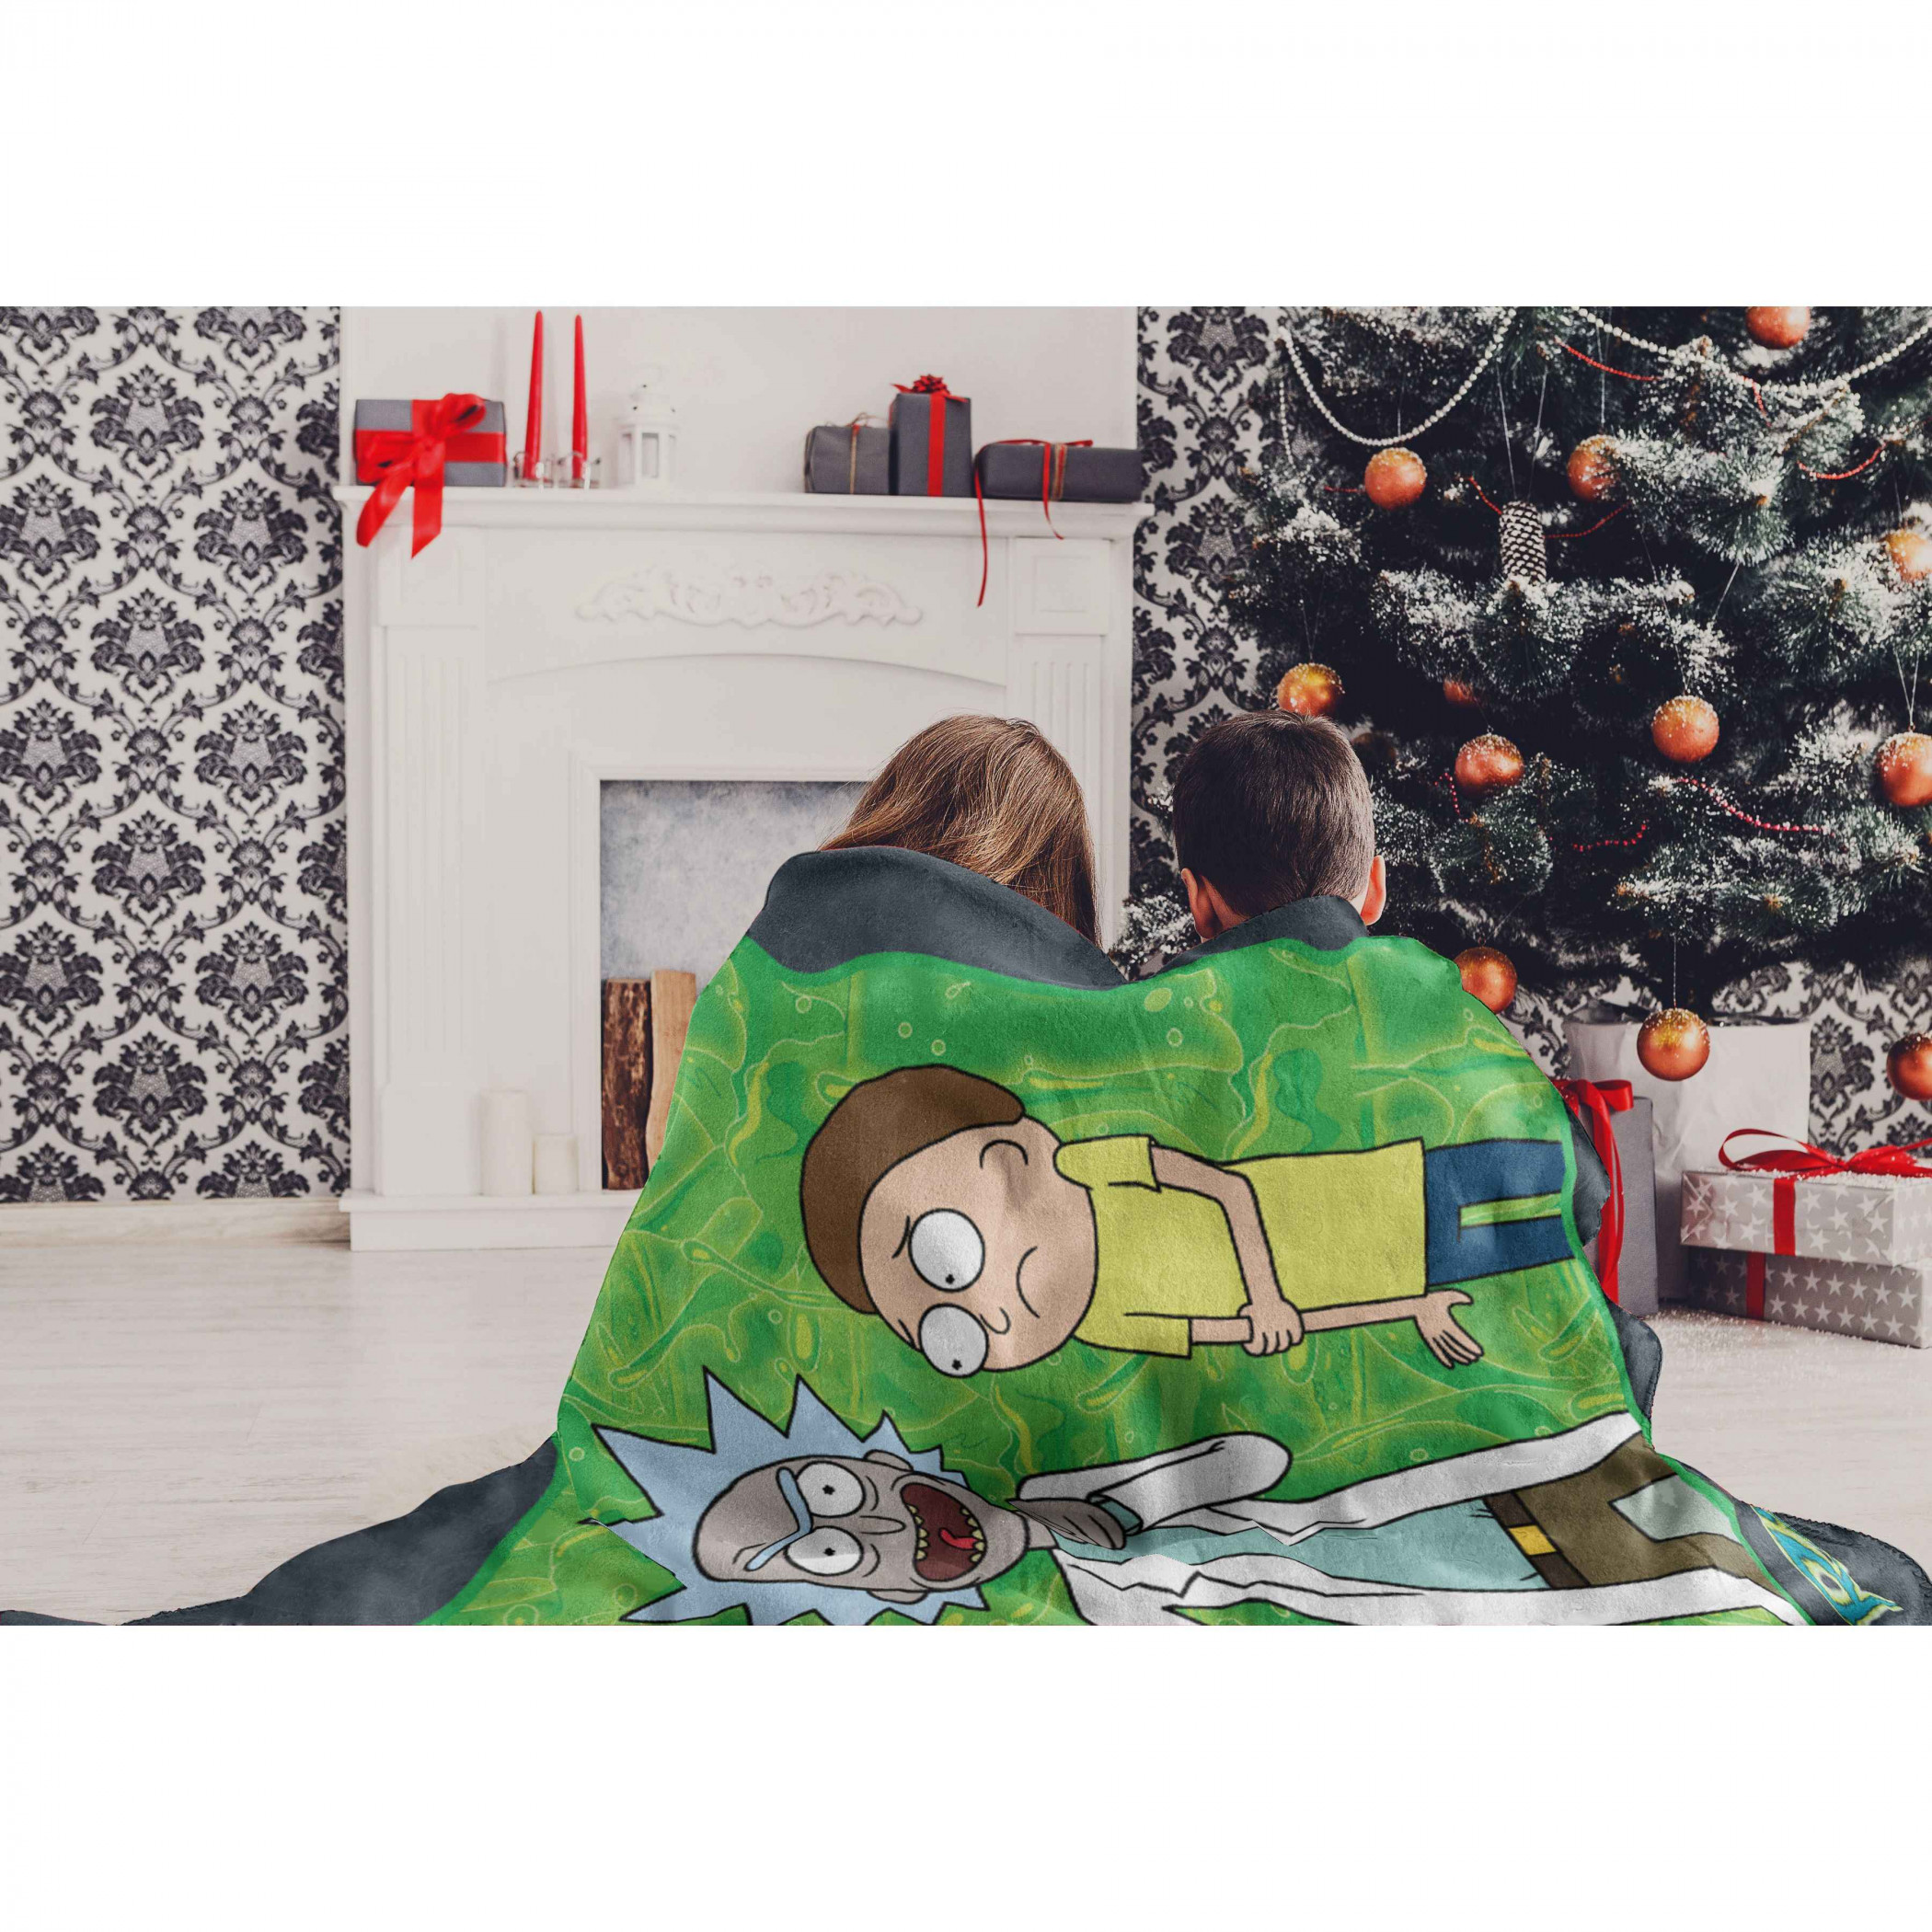 Rick And Morty Investigation Micro Raschel Throw Blanket 46"x60"